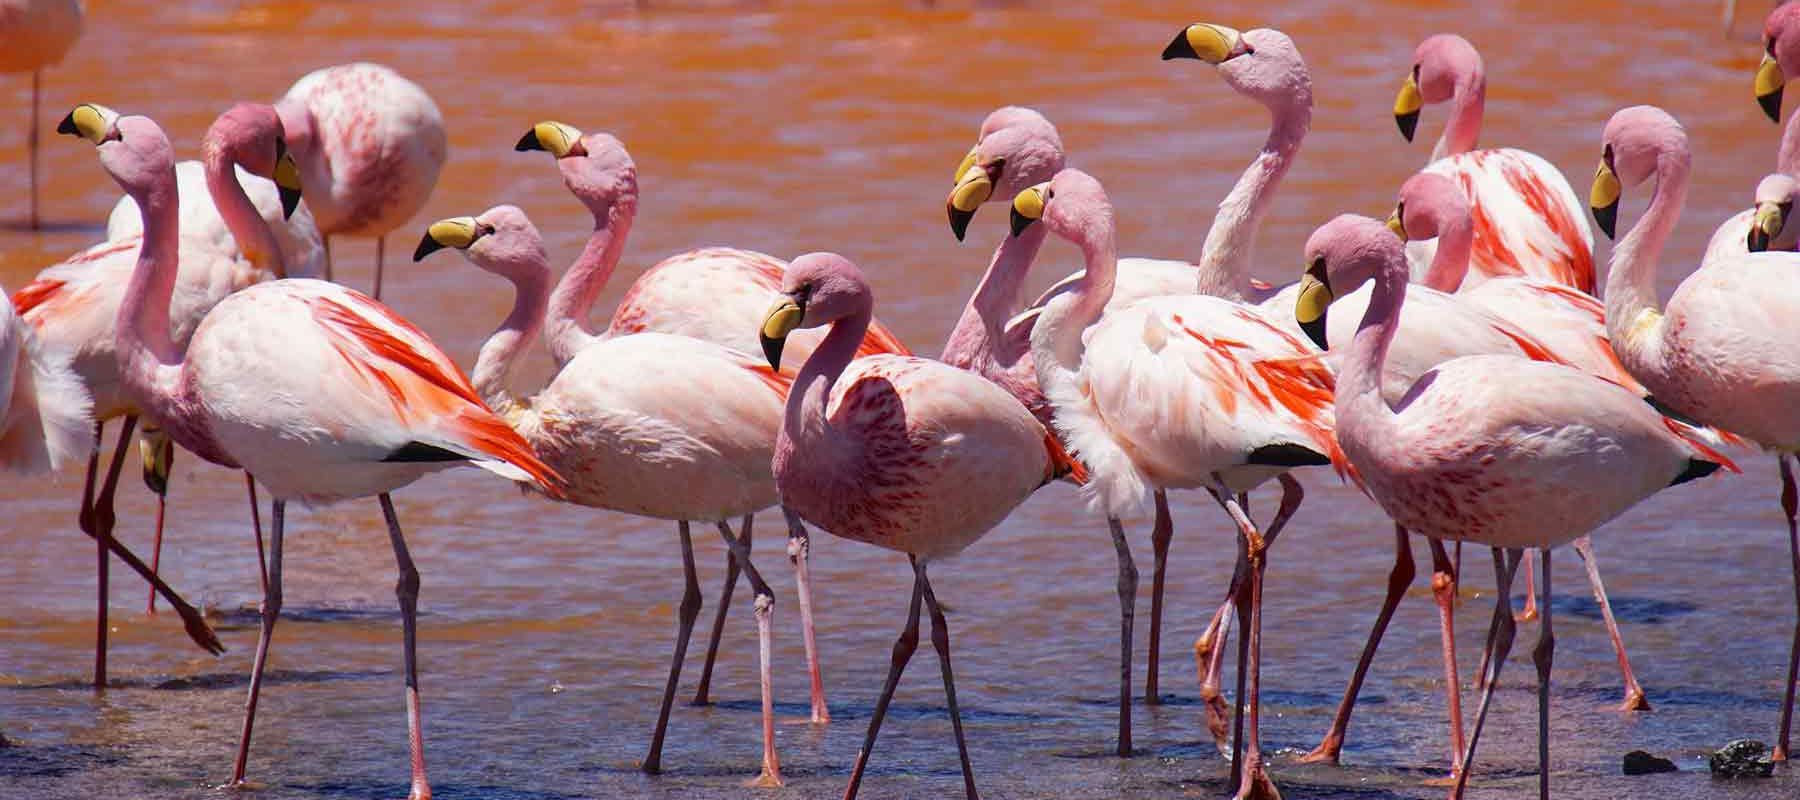 Groups of Flamingos In Bolivia